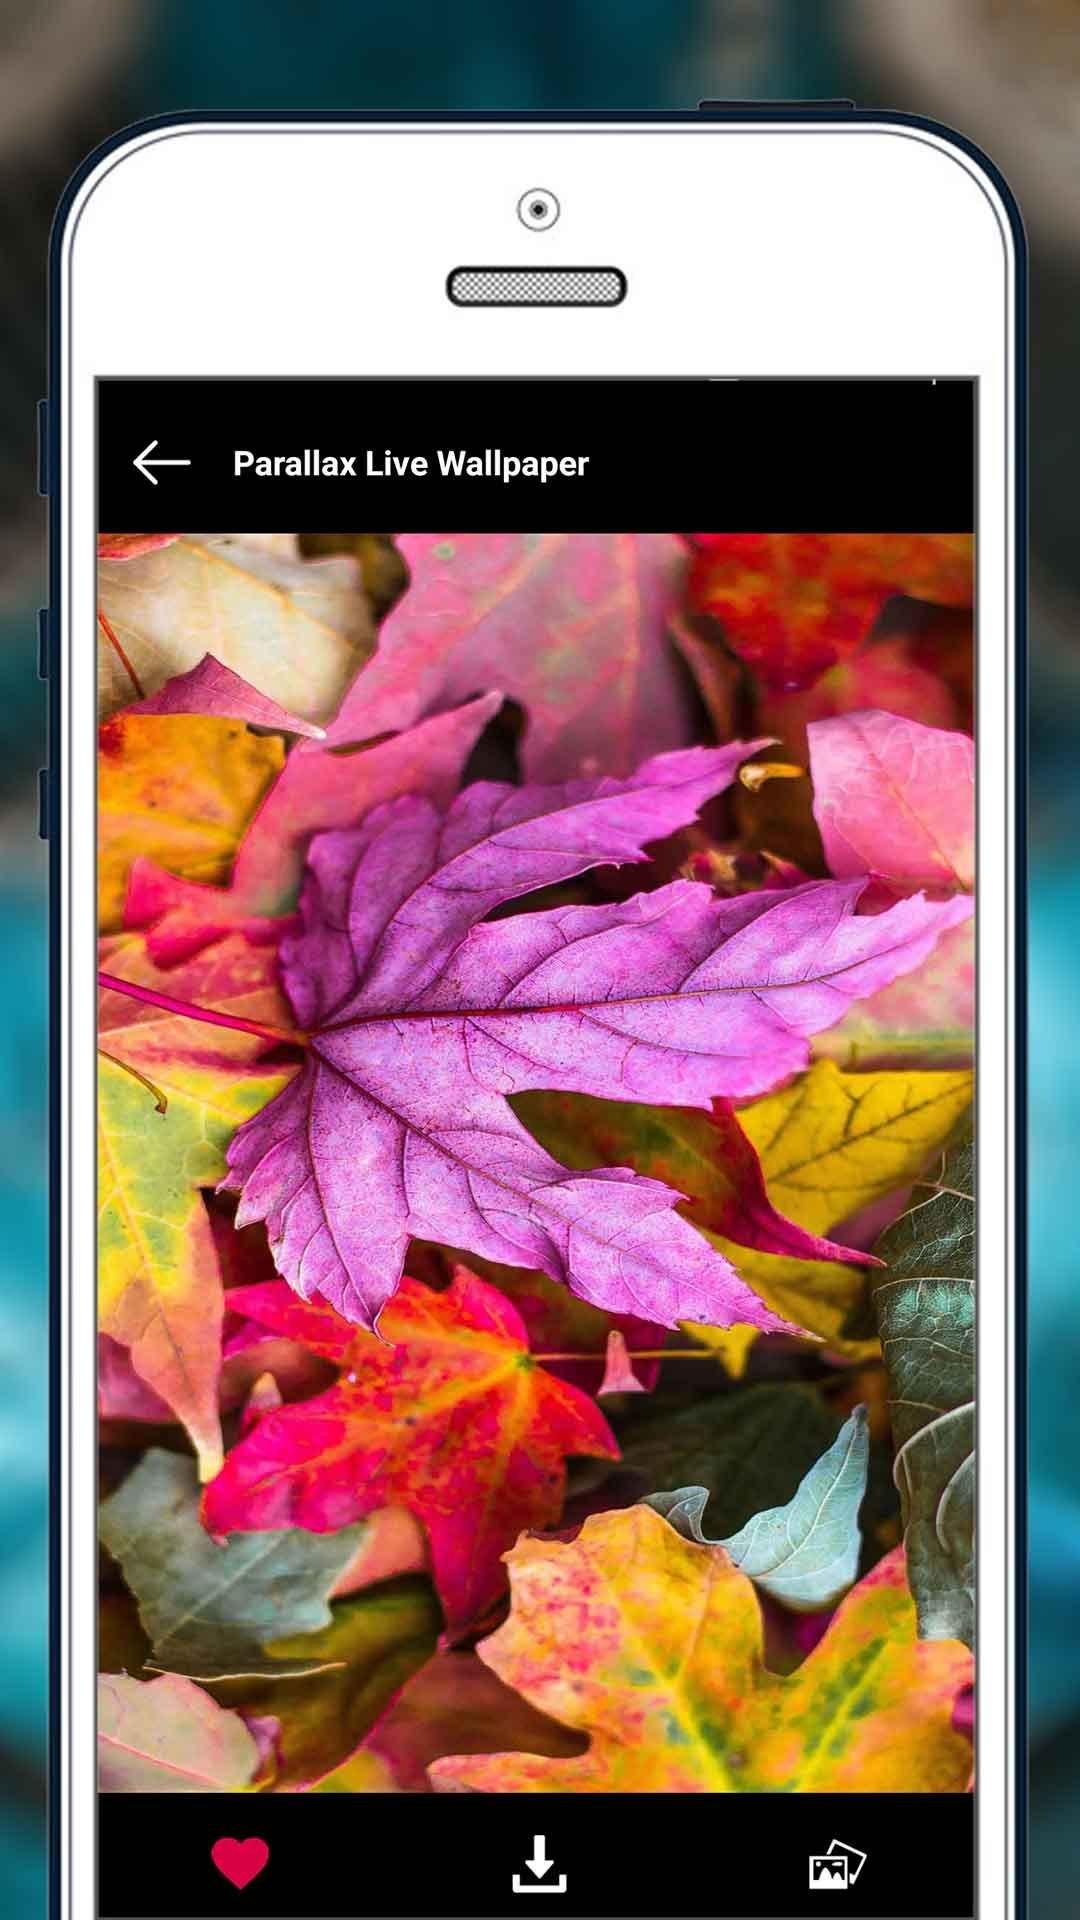 Parallax Live Wallpaper - Android Source Code by Radhi1995 | Codester